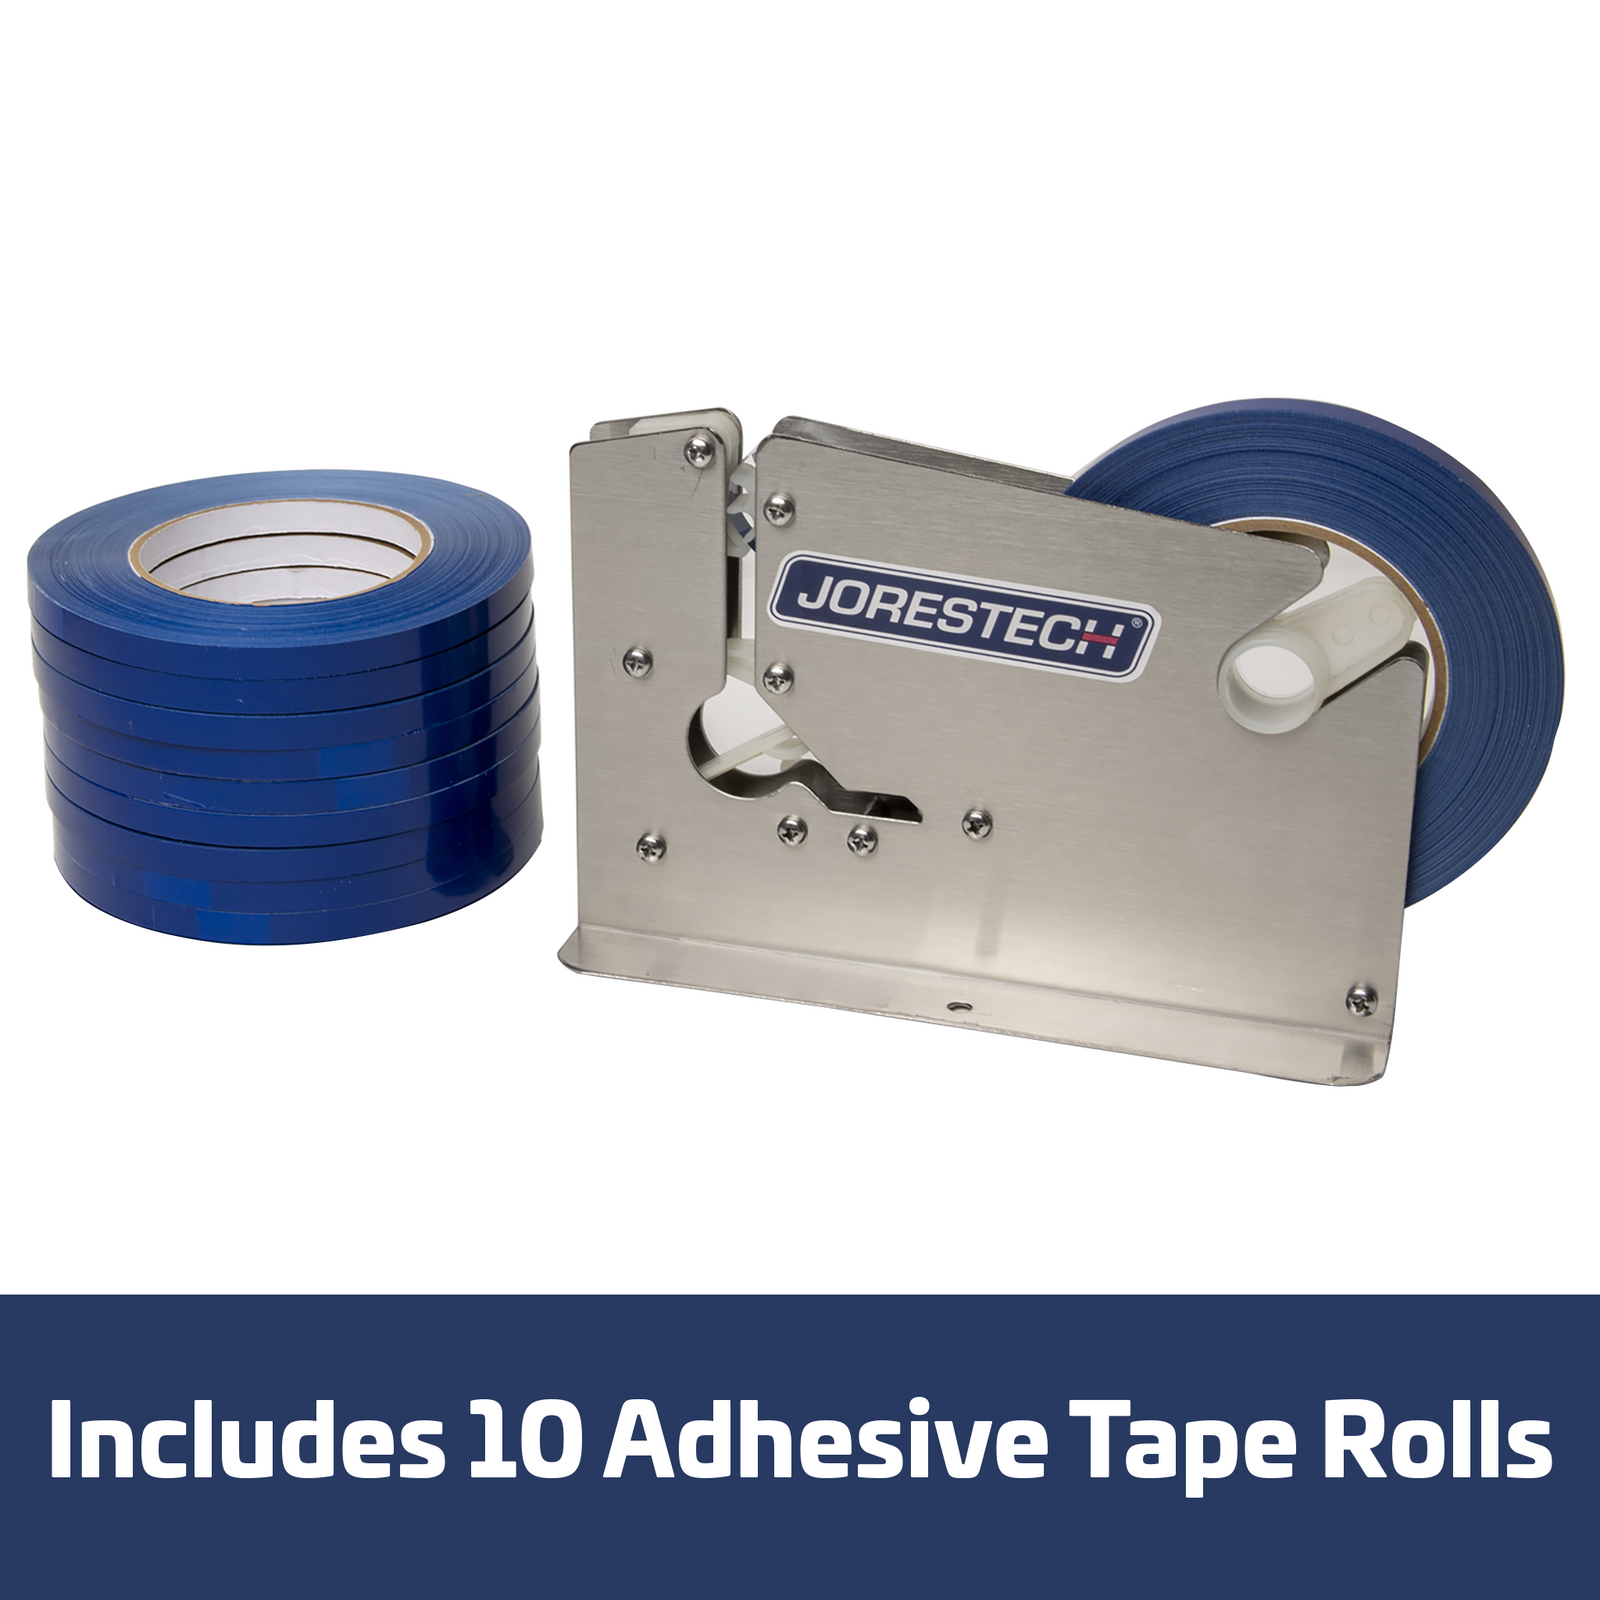 Stainless Steel Manual Bag Taper with 10 Blue Self-Adhesive 3/8” Tape Rolls